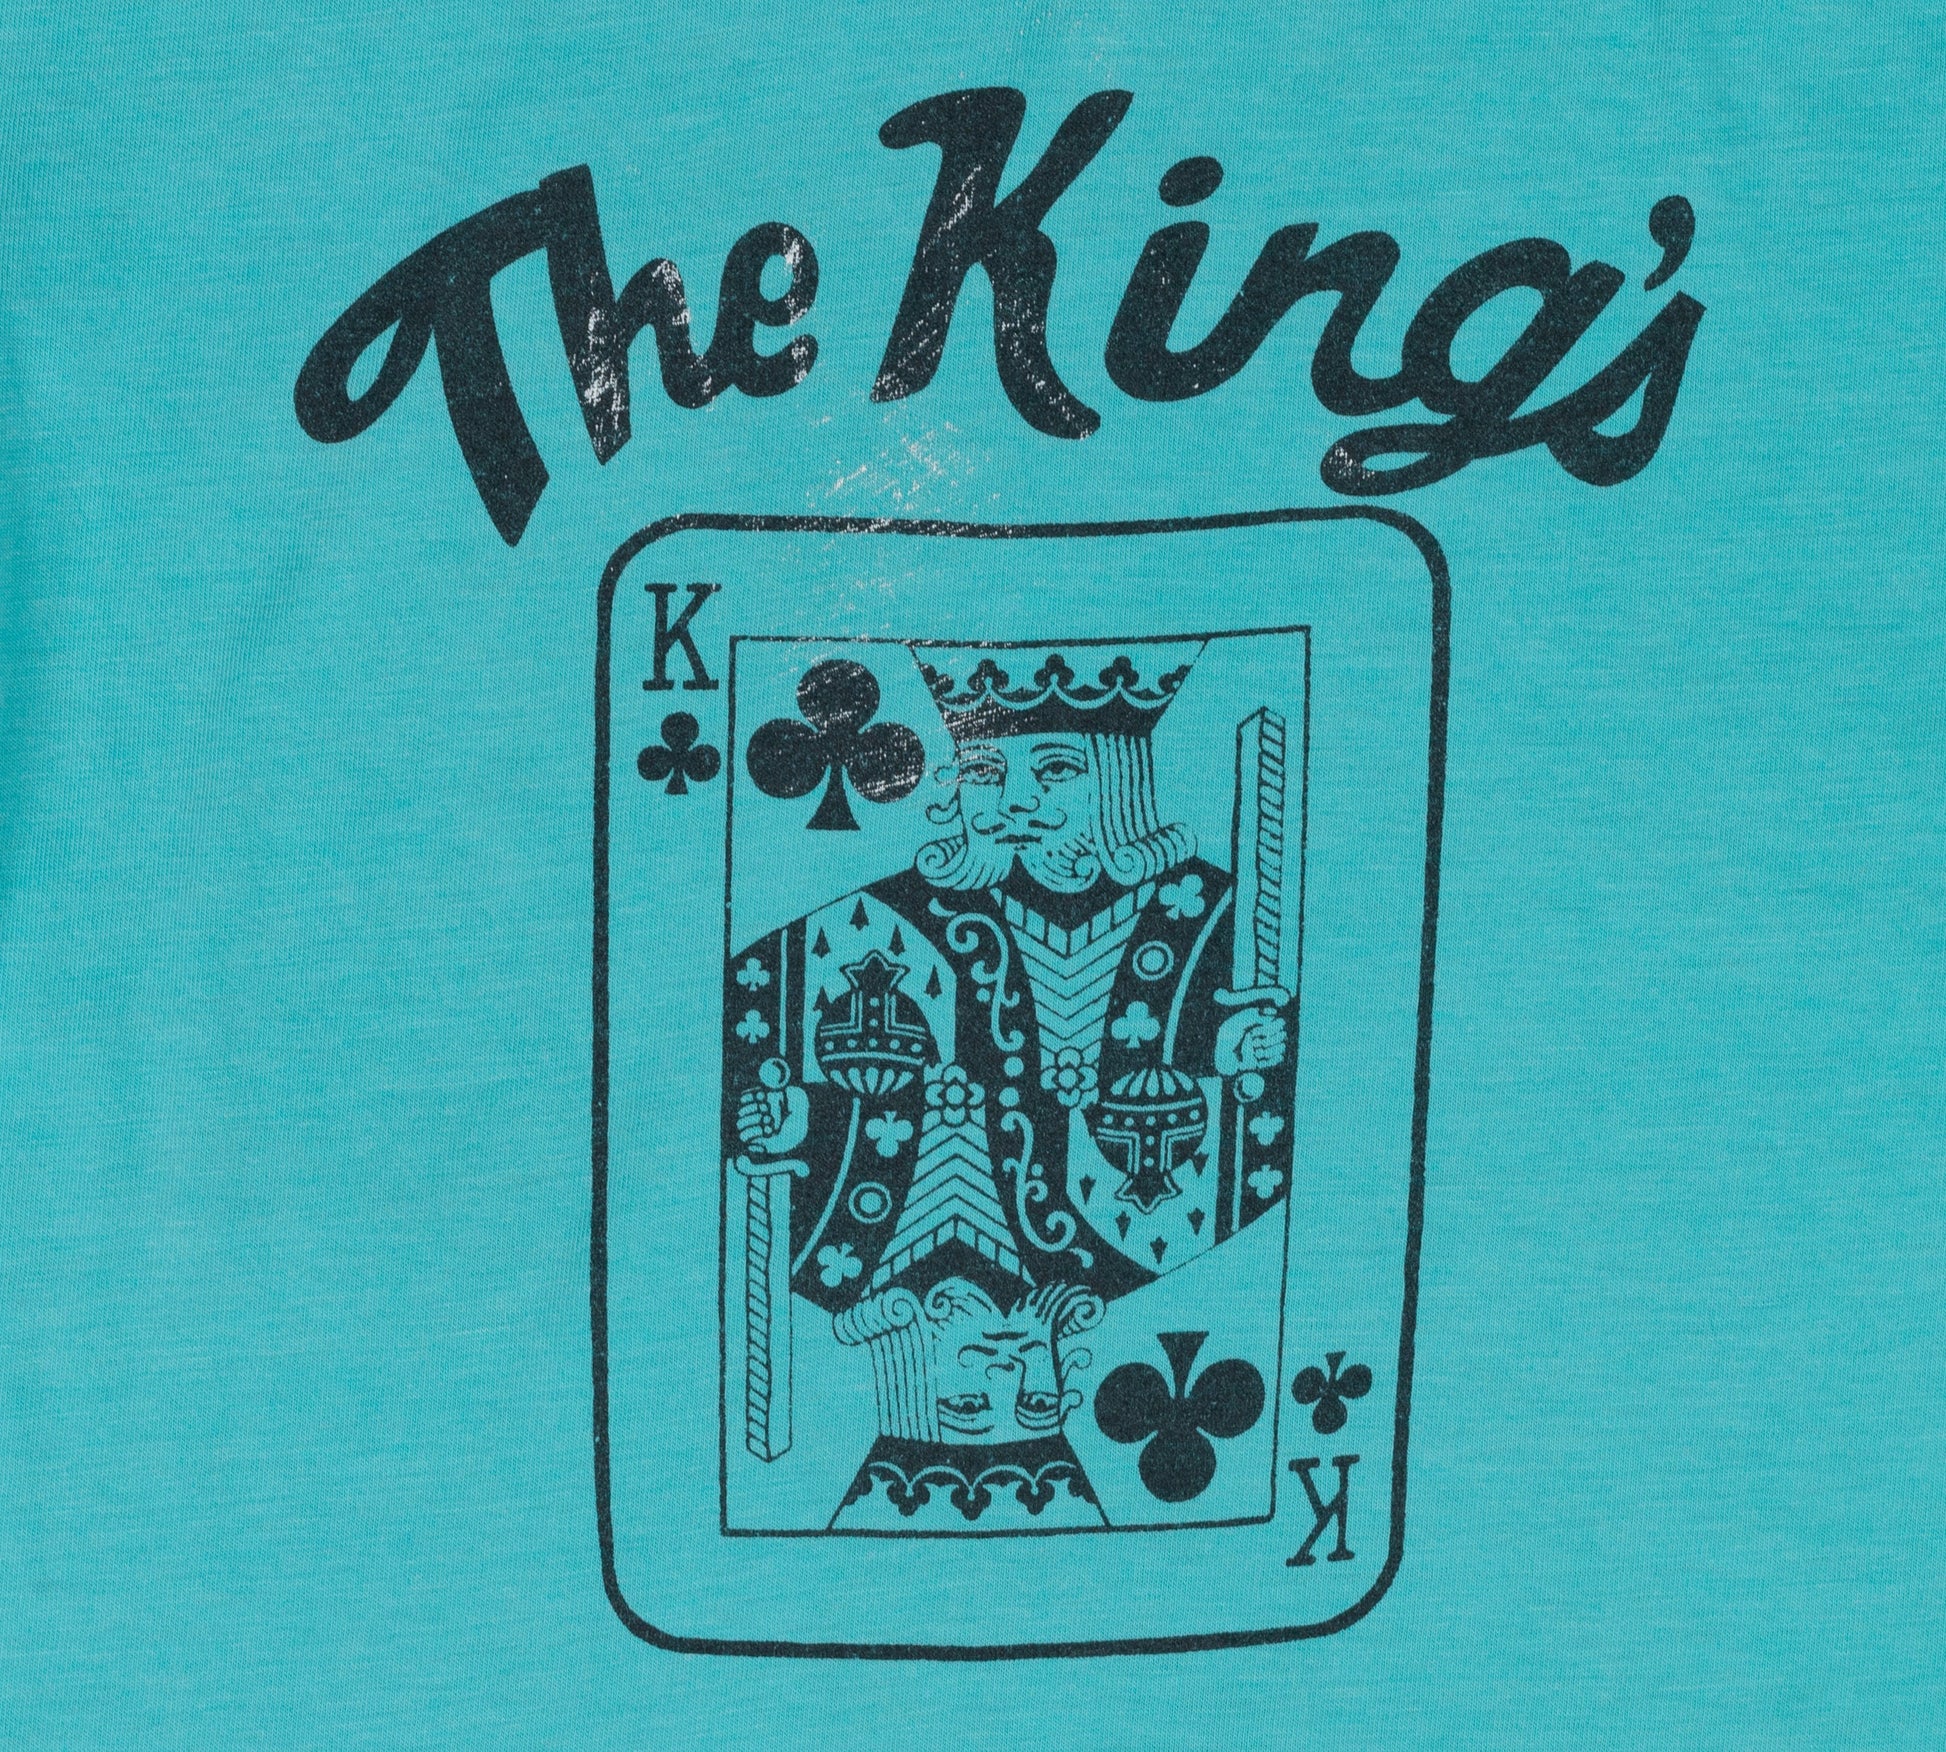 Vintage The King Of Clubs Distressed Tee - Men's Small, Women's Medium 